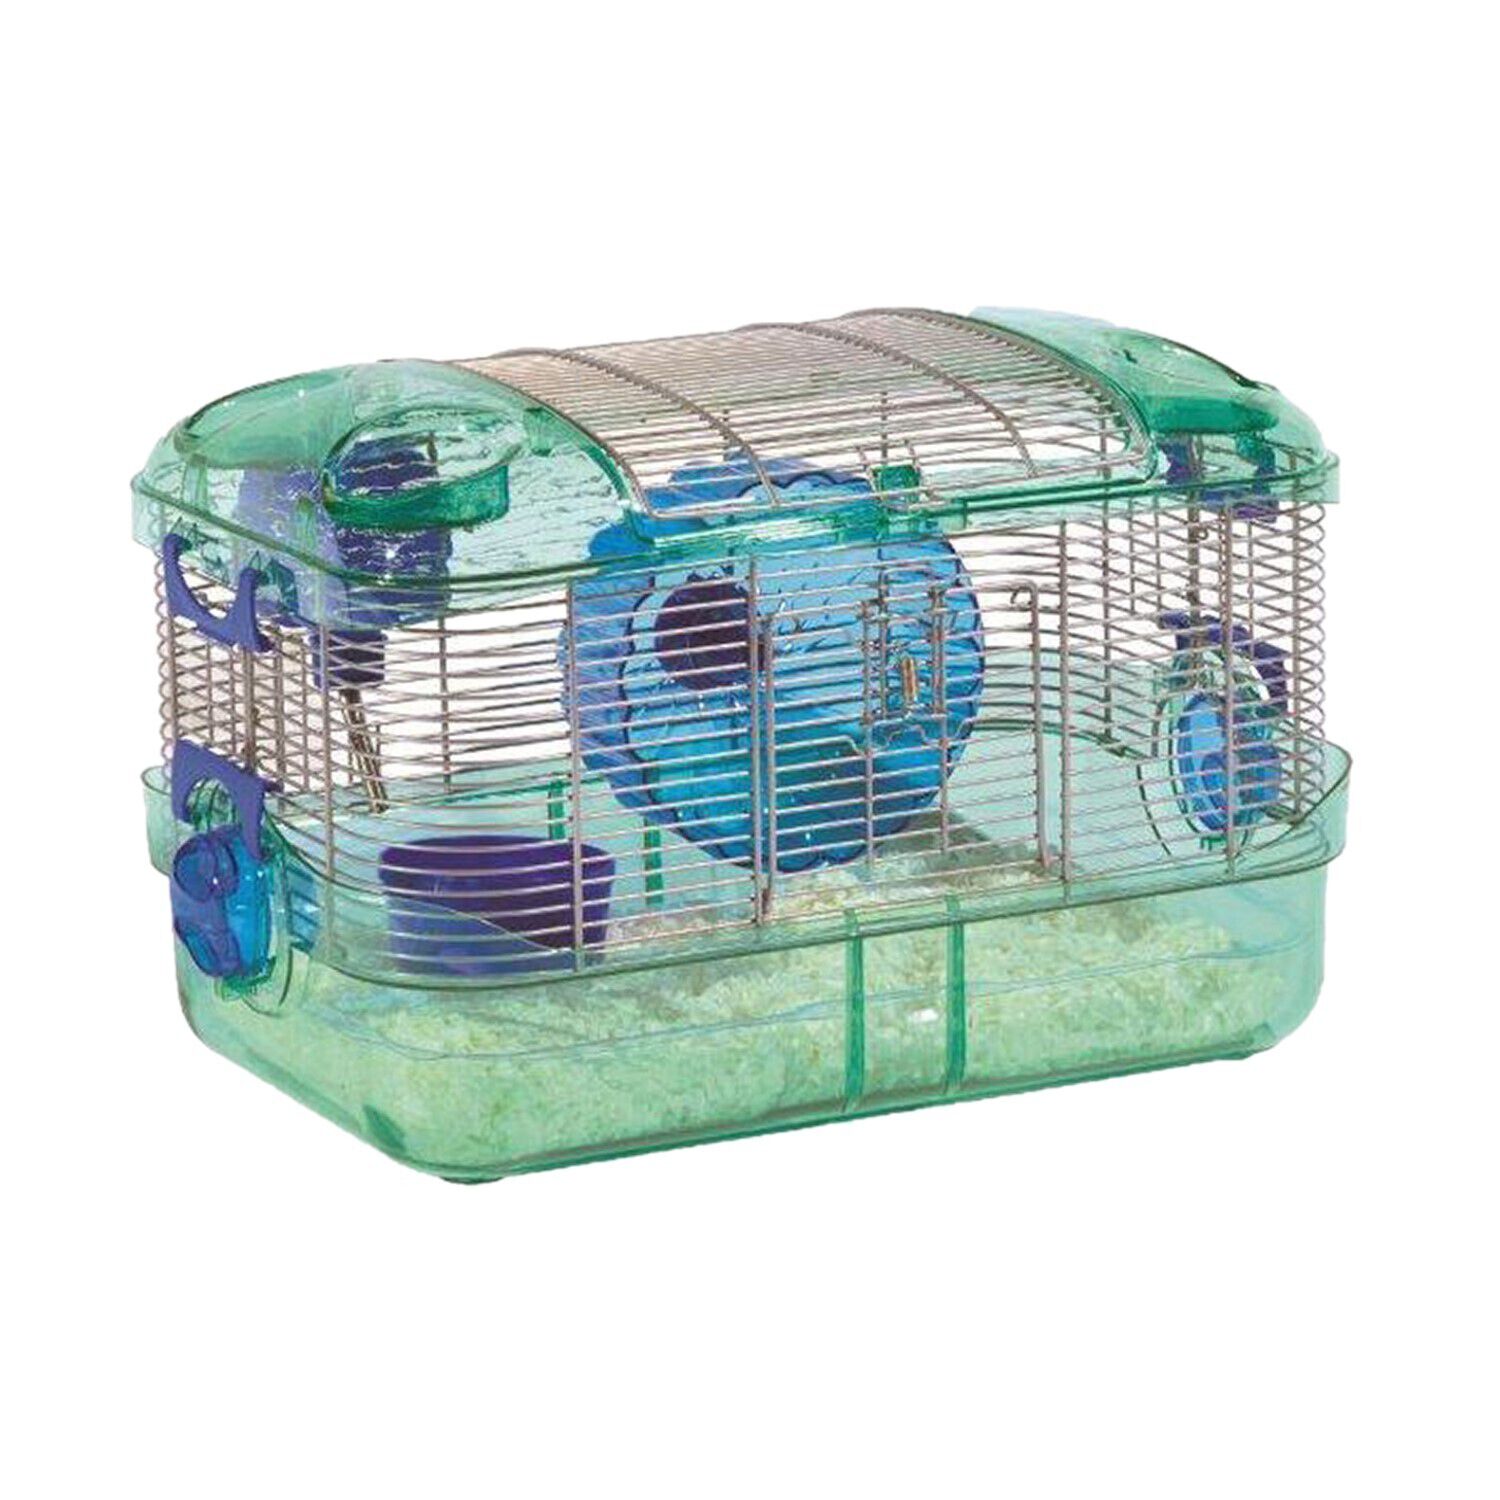 25% Off All Kaytee Hamster Cages and Supplies 